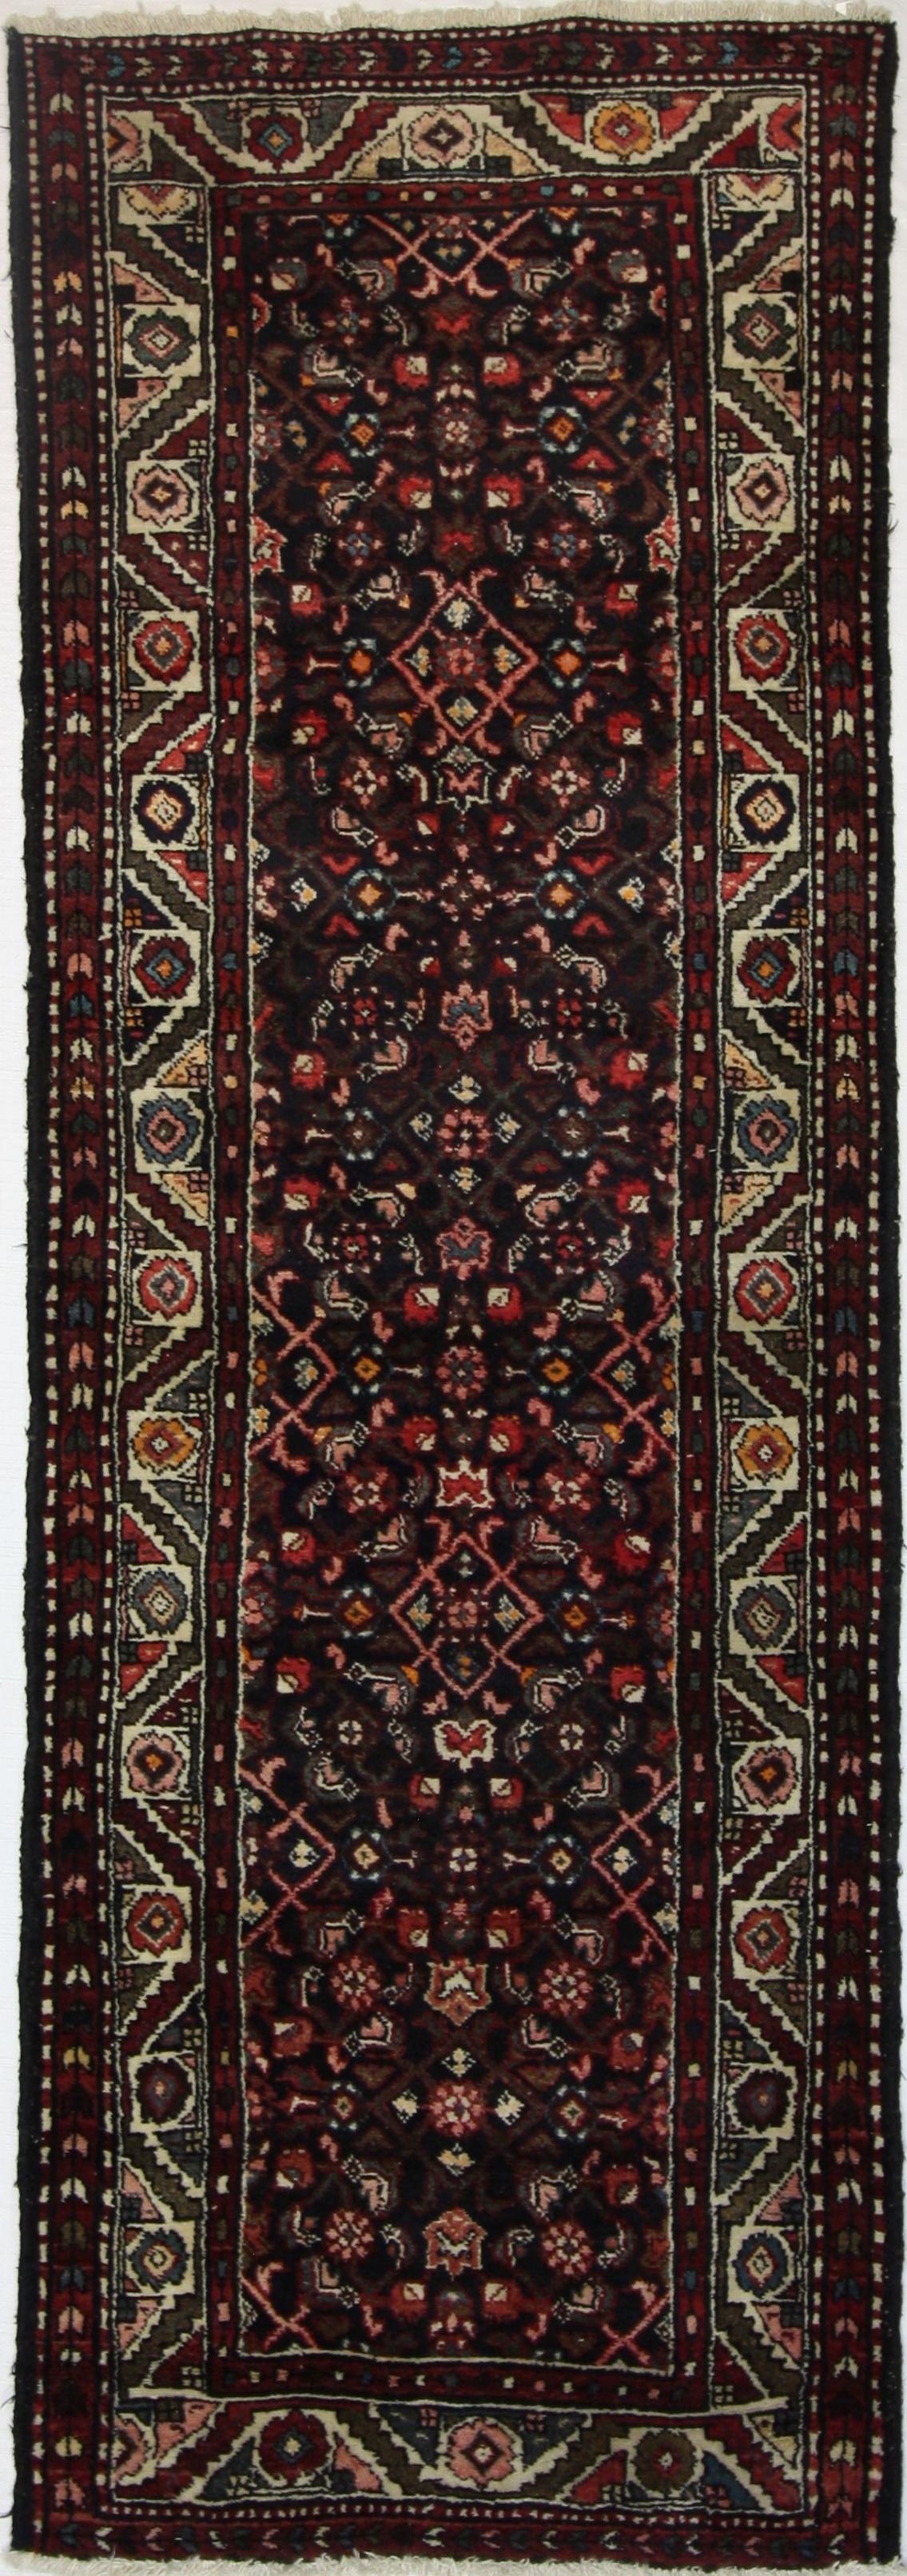 Hand Knotted Wool Red Dk Traditional Persian Rug 3'4" x 9'7"